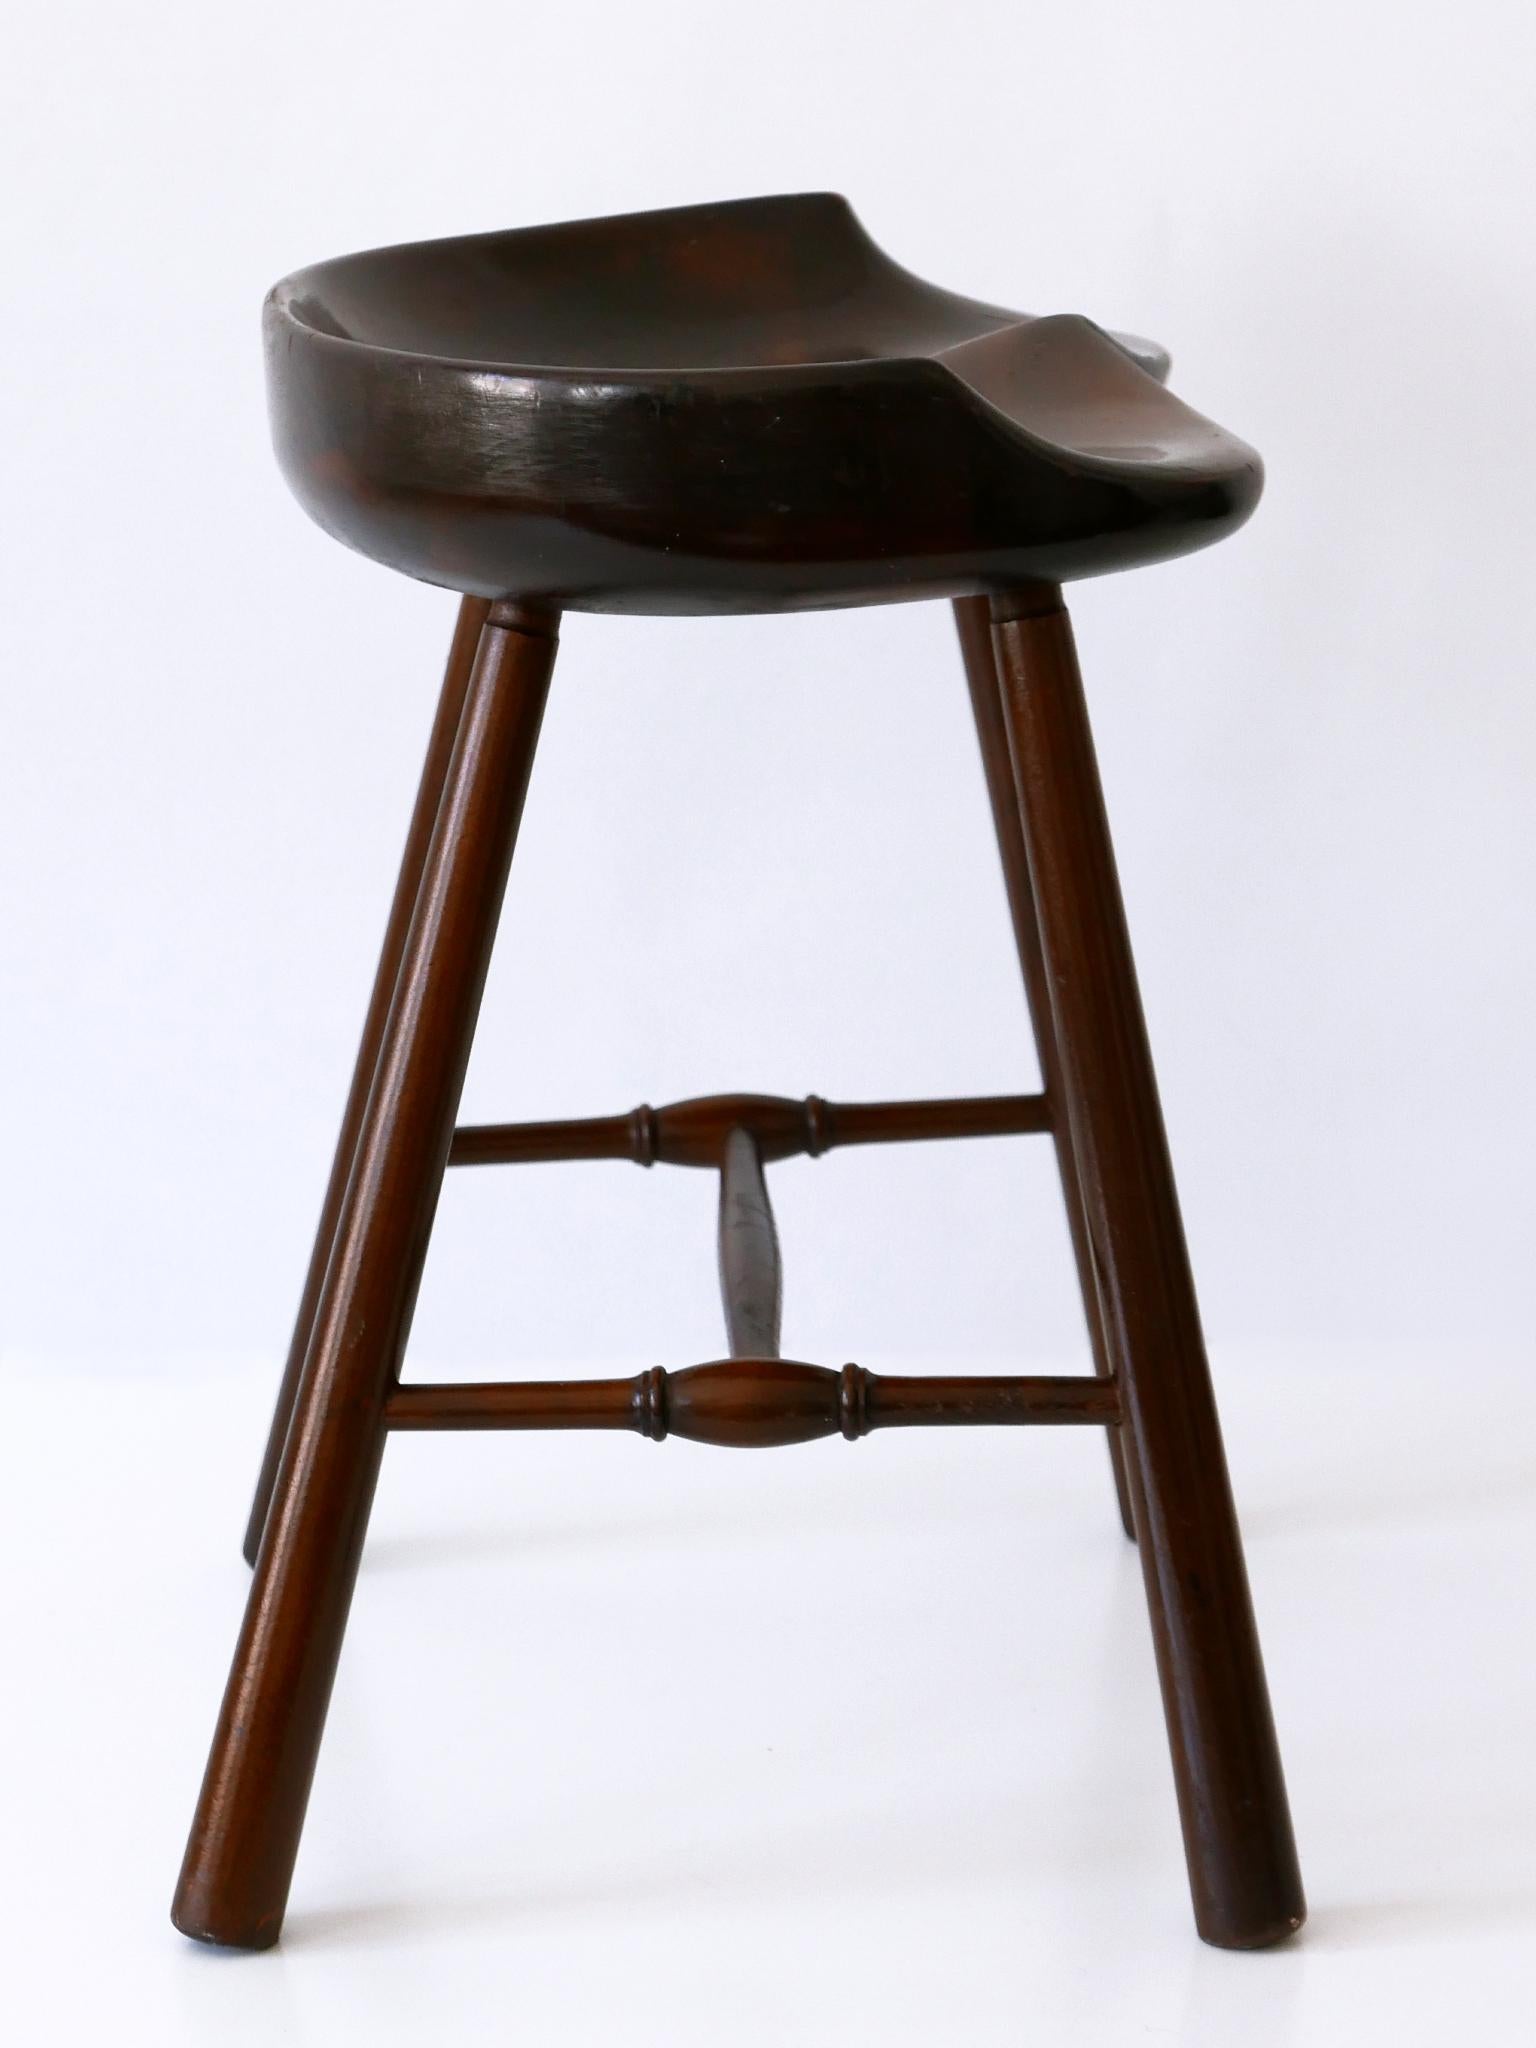 Sculptural Mid-Century Modern Solid Wood Stool Germany 1950s For Sale 4